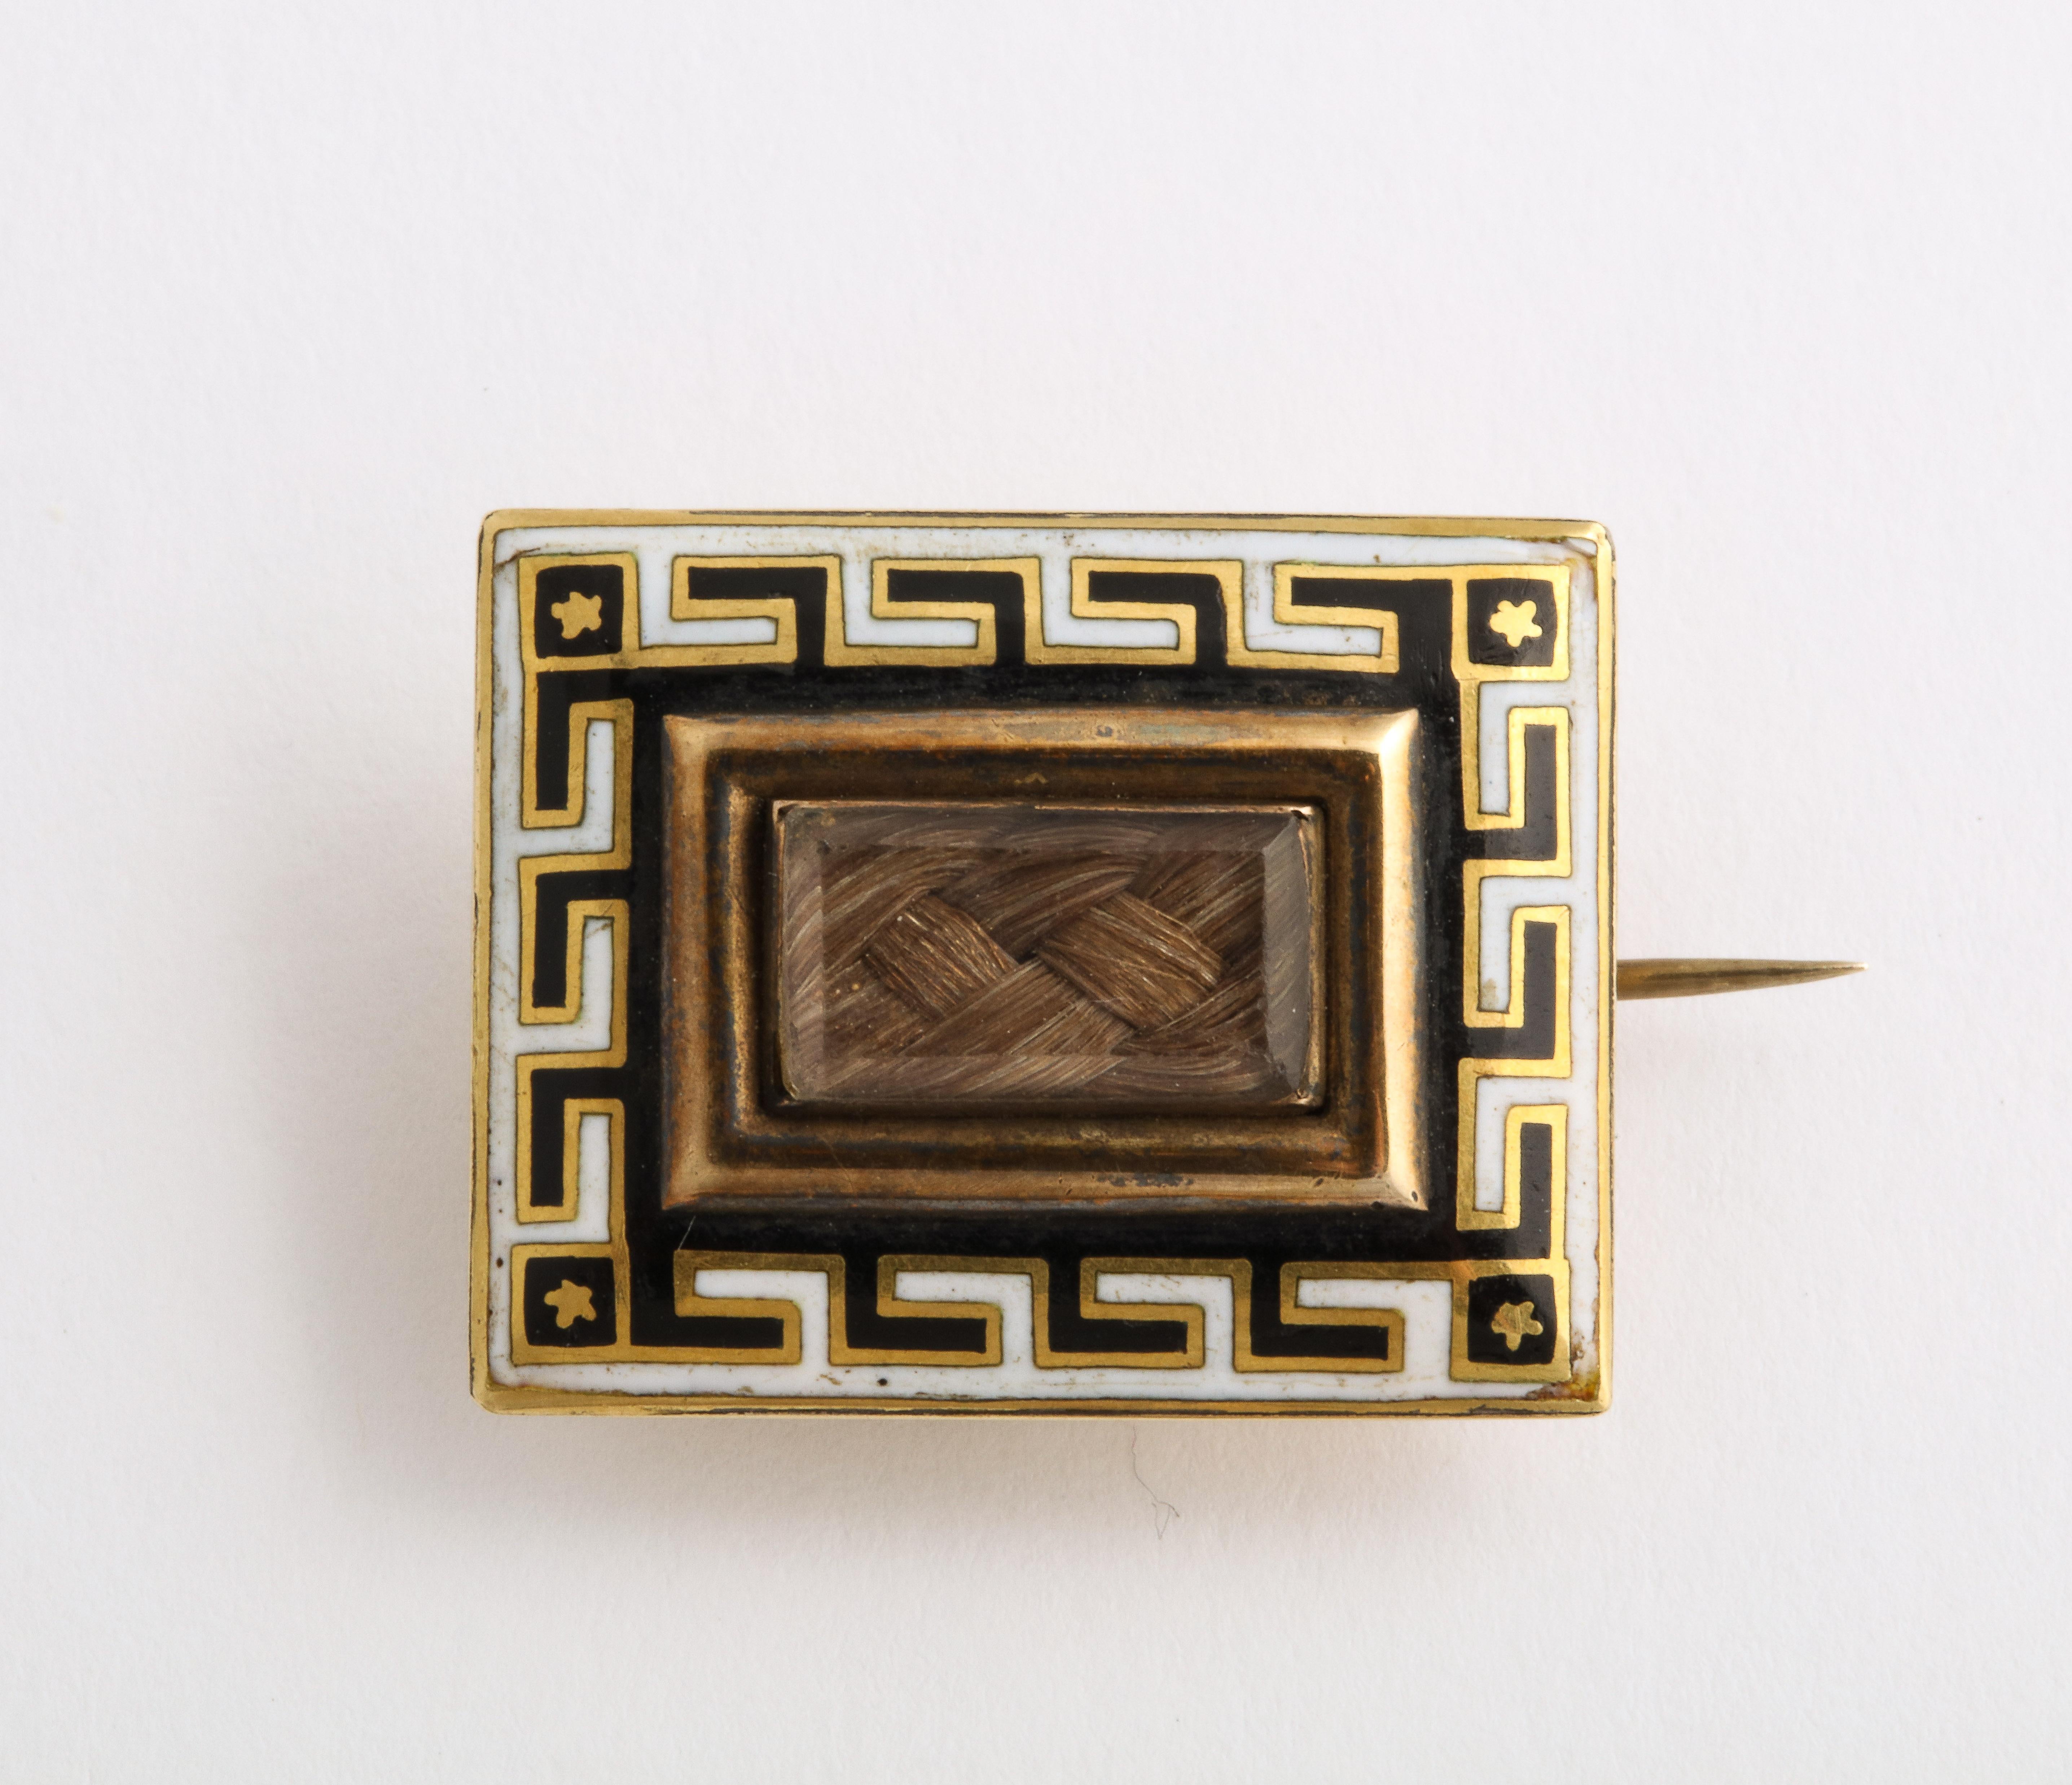 Two lovely and unique memorial brooches from the mid Victorian era executed in 15 Kt gold. The larger has an scalloped edge that is enameled with black scallops. An inner oval of black enamel frames a gold engraved border framing woven hair in